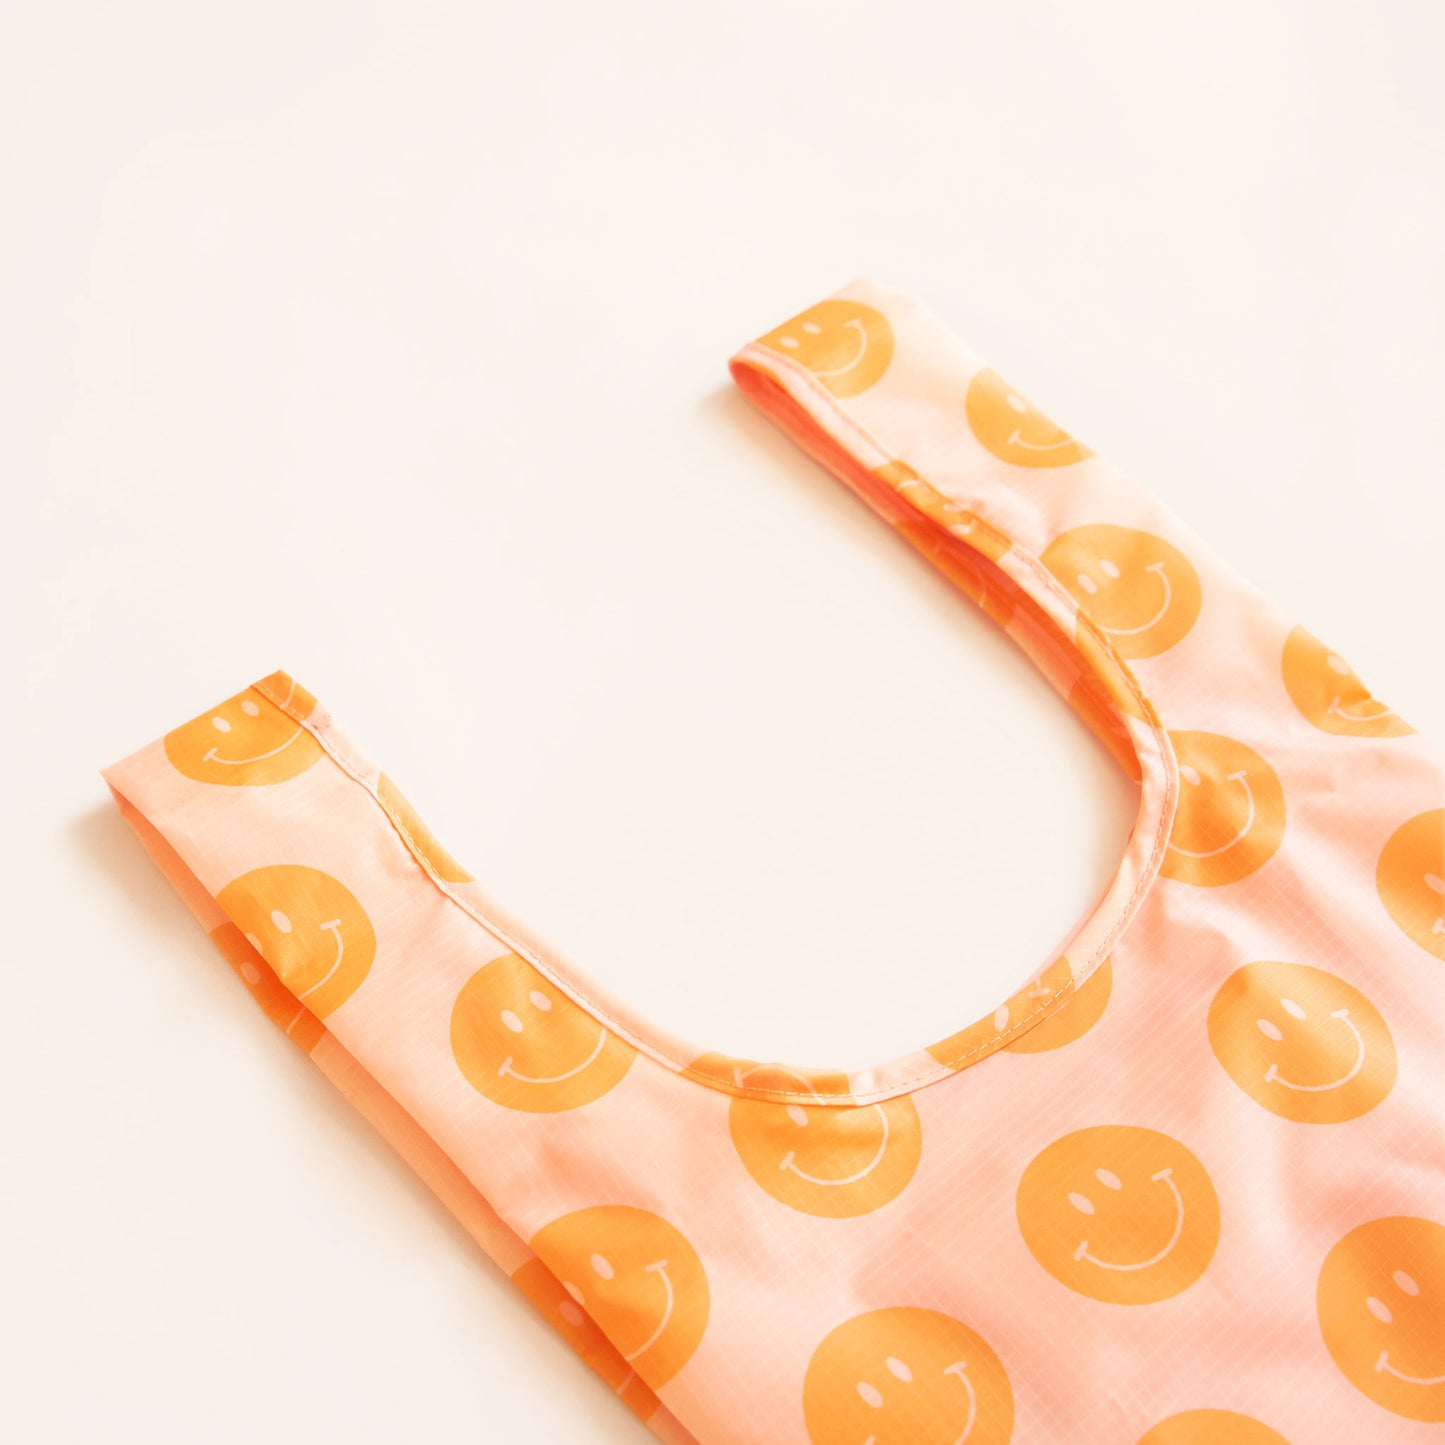 Zoomed view of peach nylon reusable bag. The bag is covered in a print of orange smiley faces. 